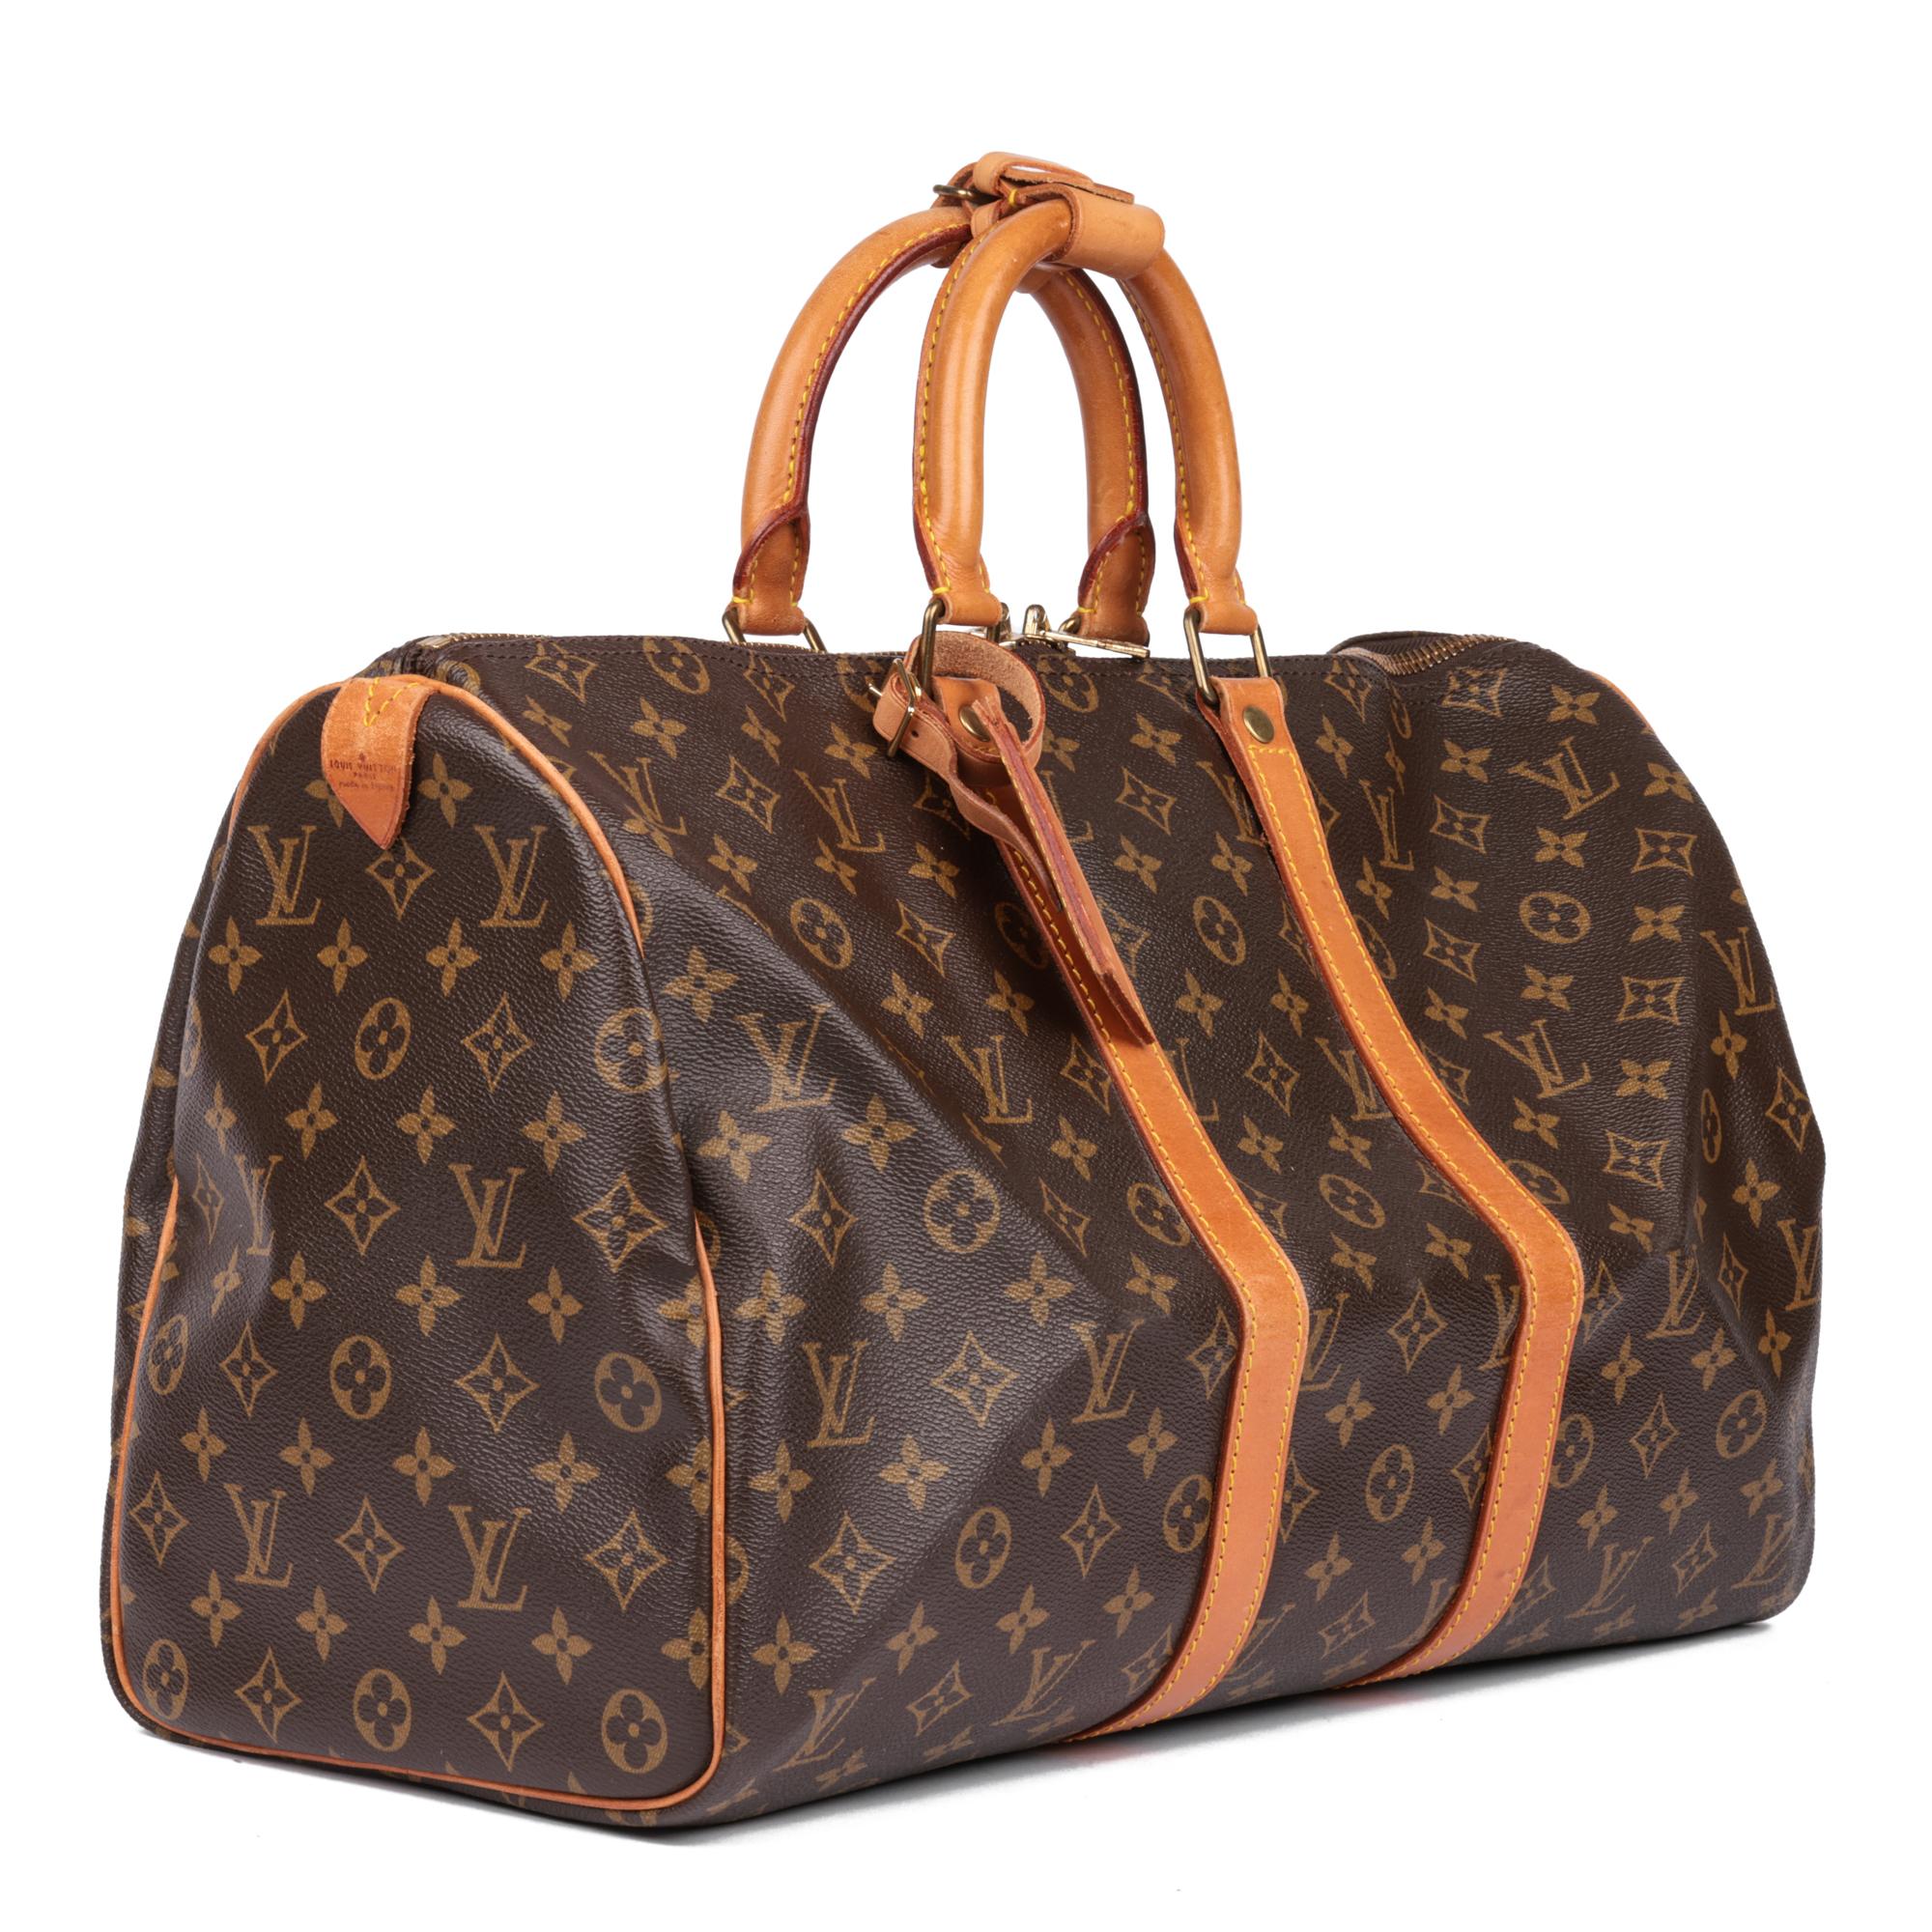 LOUIS VUITTON
Brown Monogram Coated Canvas & Vachetta Leather Vintage Keepall 45

Xupes Reference: HB5110
Serial Number: VI872
Age (Circa): 1987
Accompanied By: Luggage Tag, Handle Keeper
Authenticity Details: Date Stamp (Made in France)
Gender: